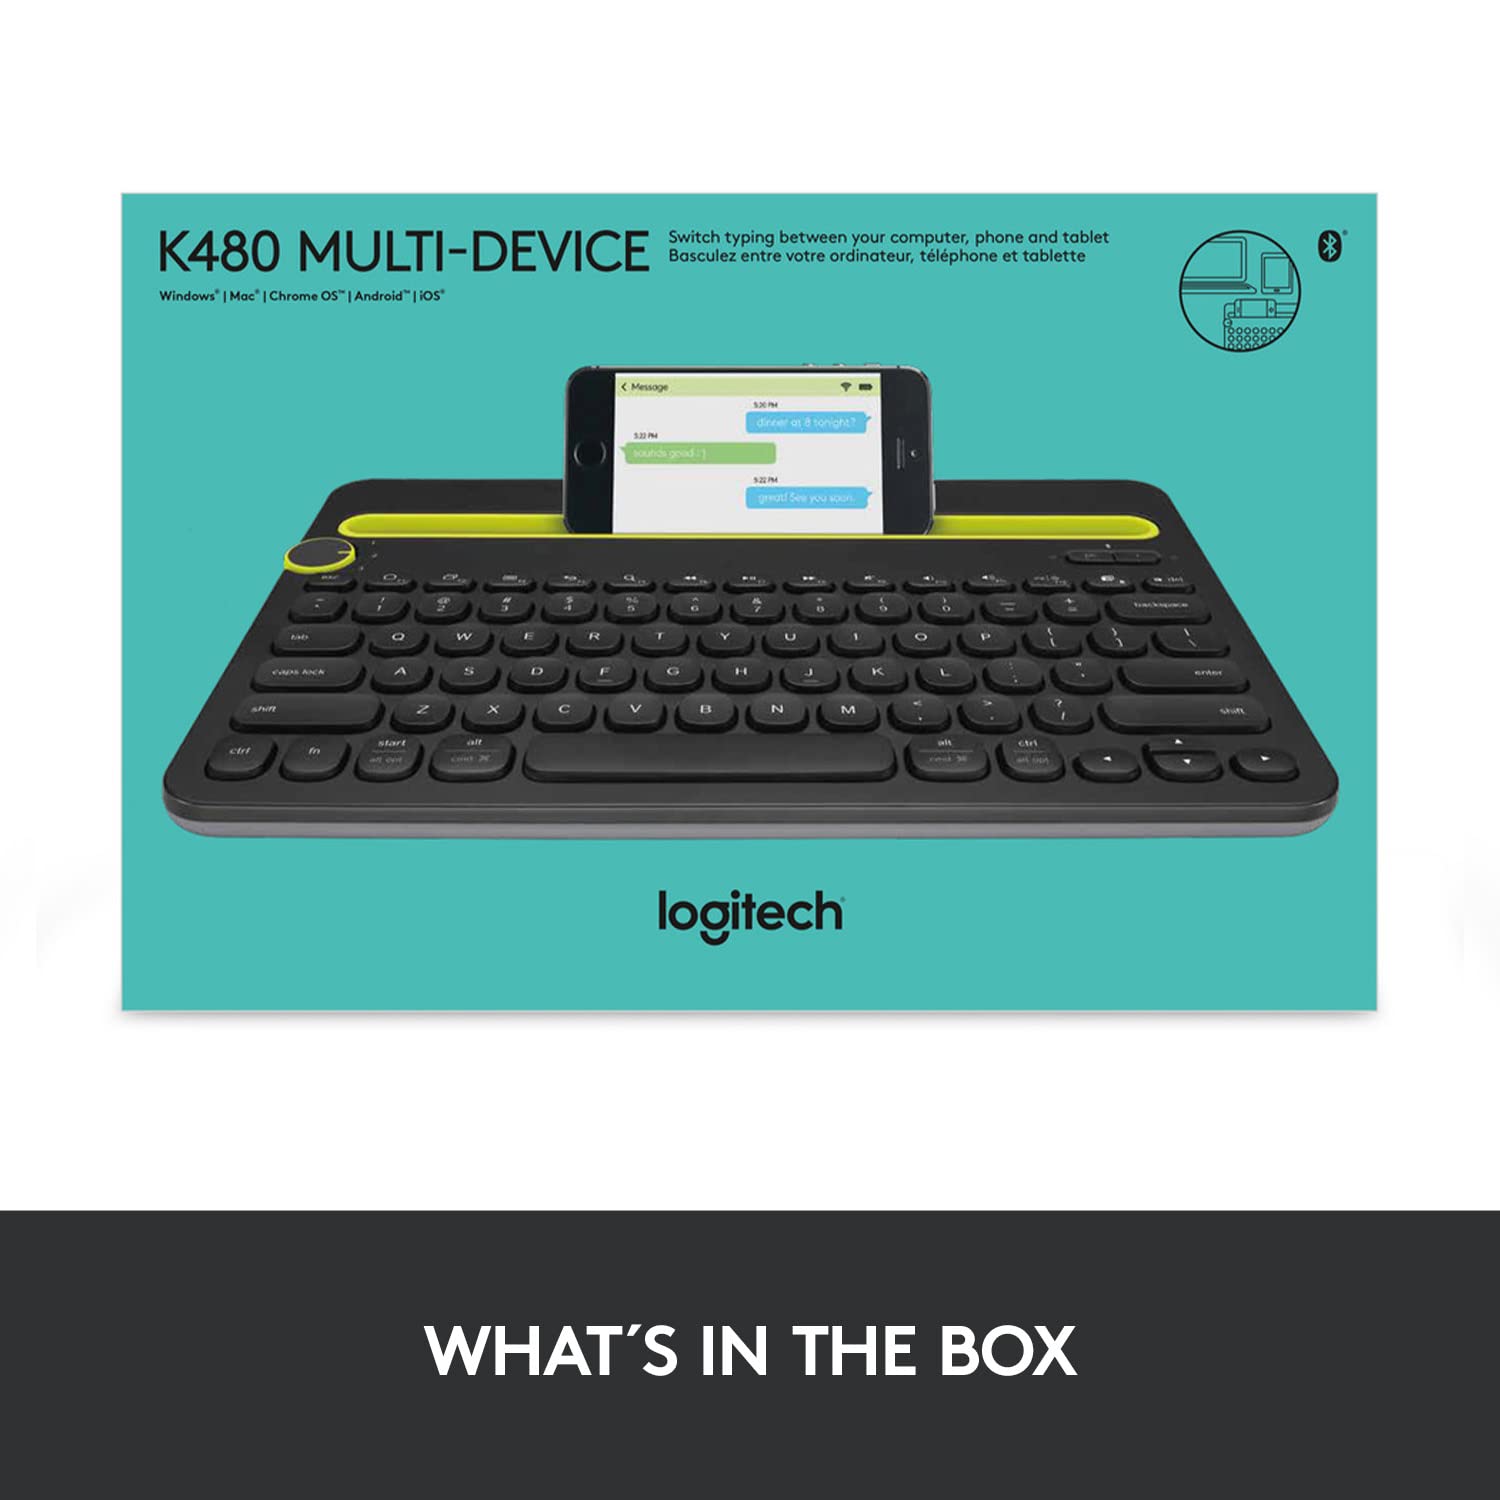 (Open Box) Logitech K480 Wireless Multi-Device Keyboard For Windows, Macos, Ipados, Android Or Chrome Os, Bluetooth, Compact, Compatible With Pc, Mac, Laptop, Smartphone, Tablet - Black (Grade - A+)